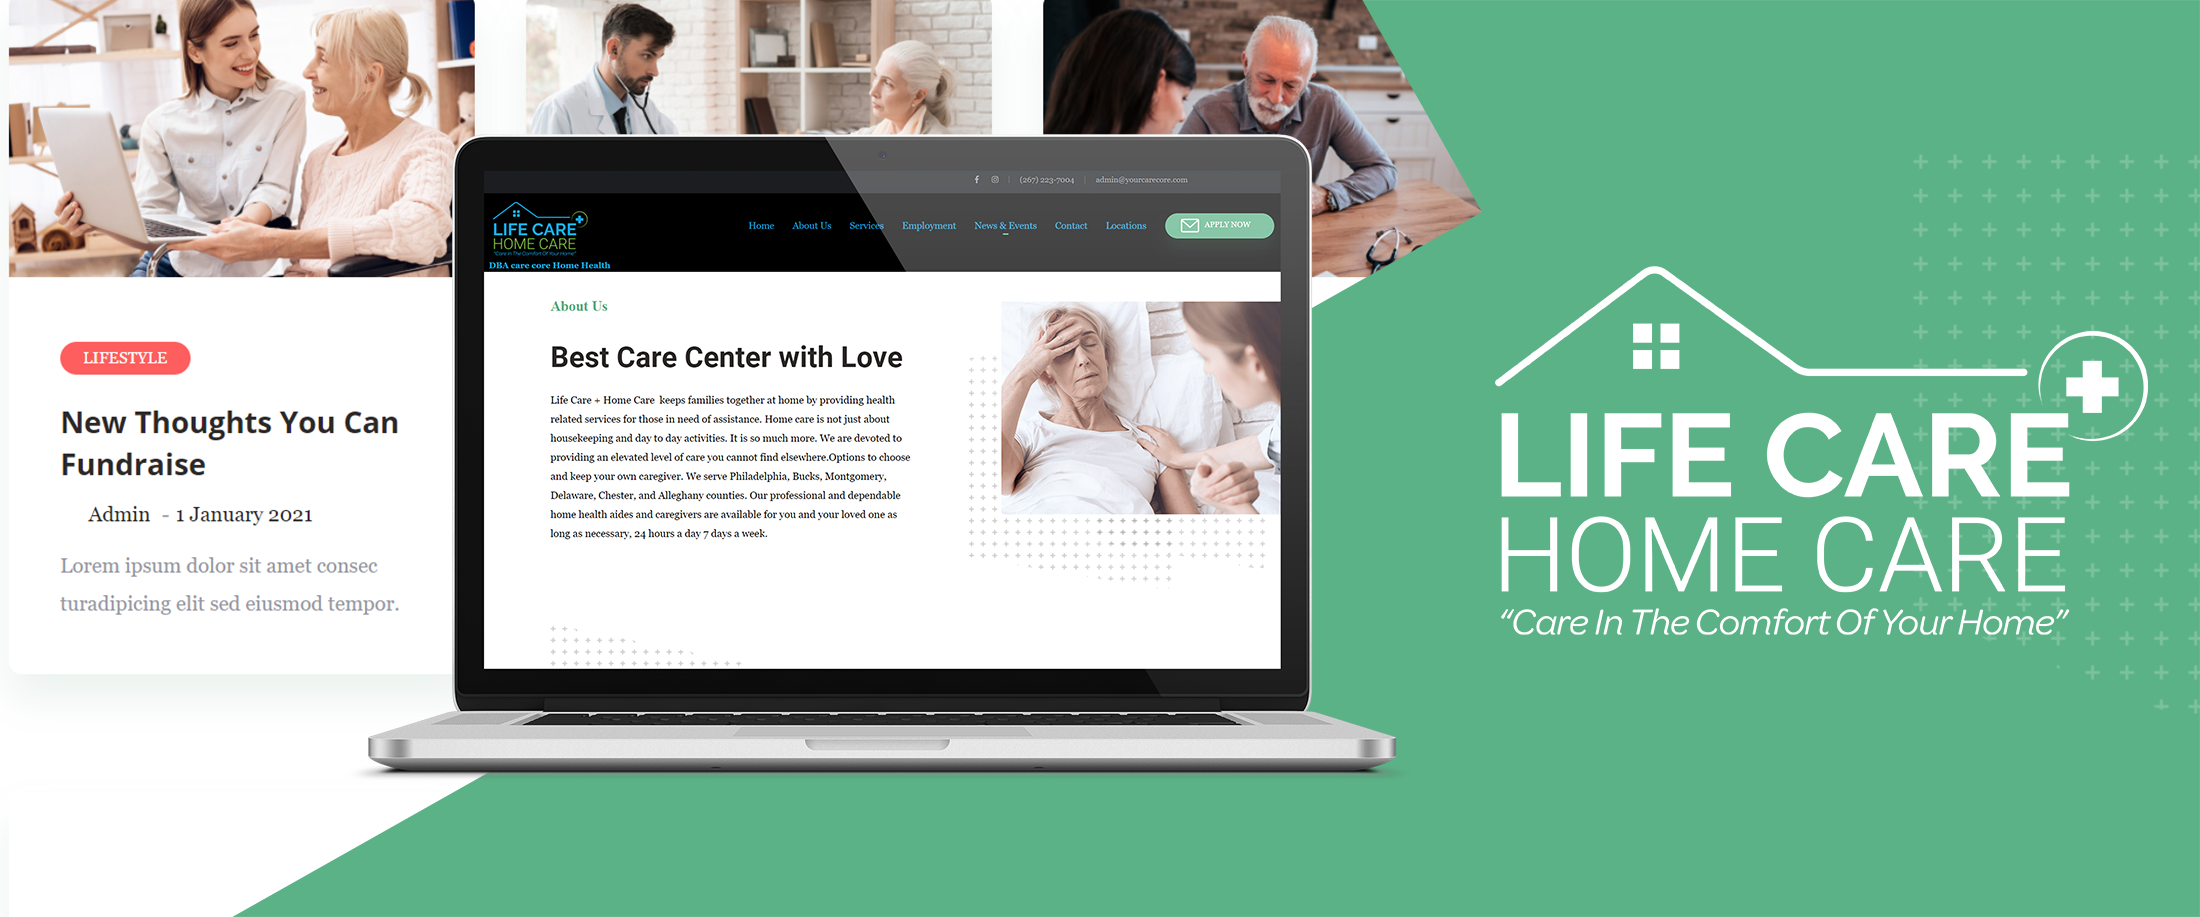 Life-Care+Home-Care-Banner